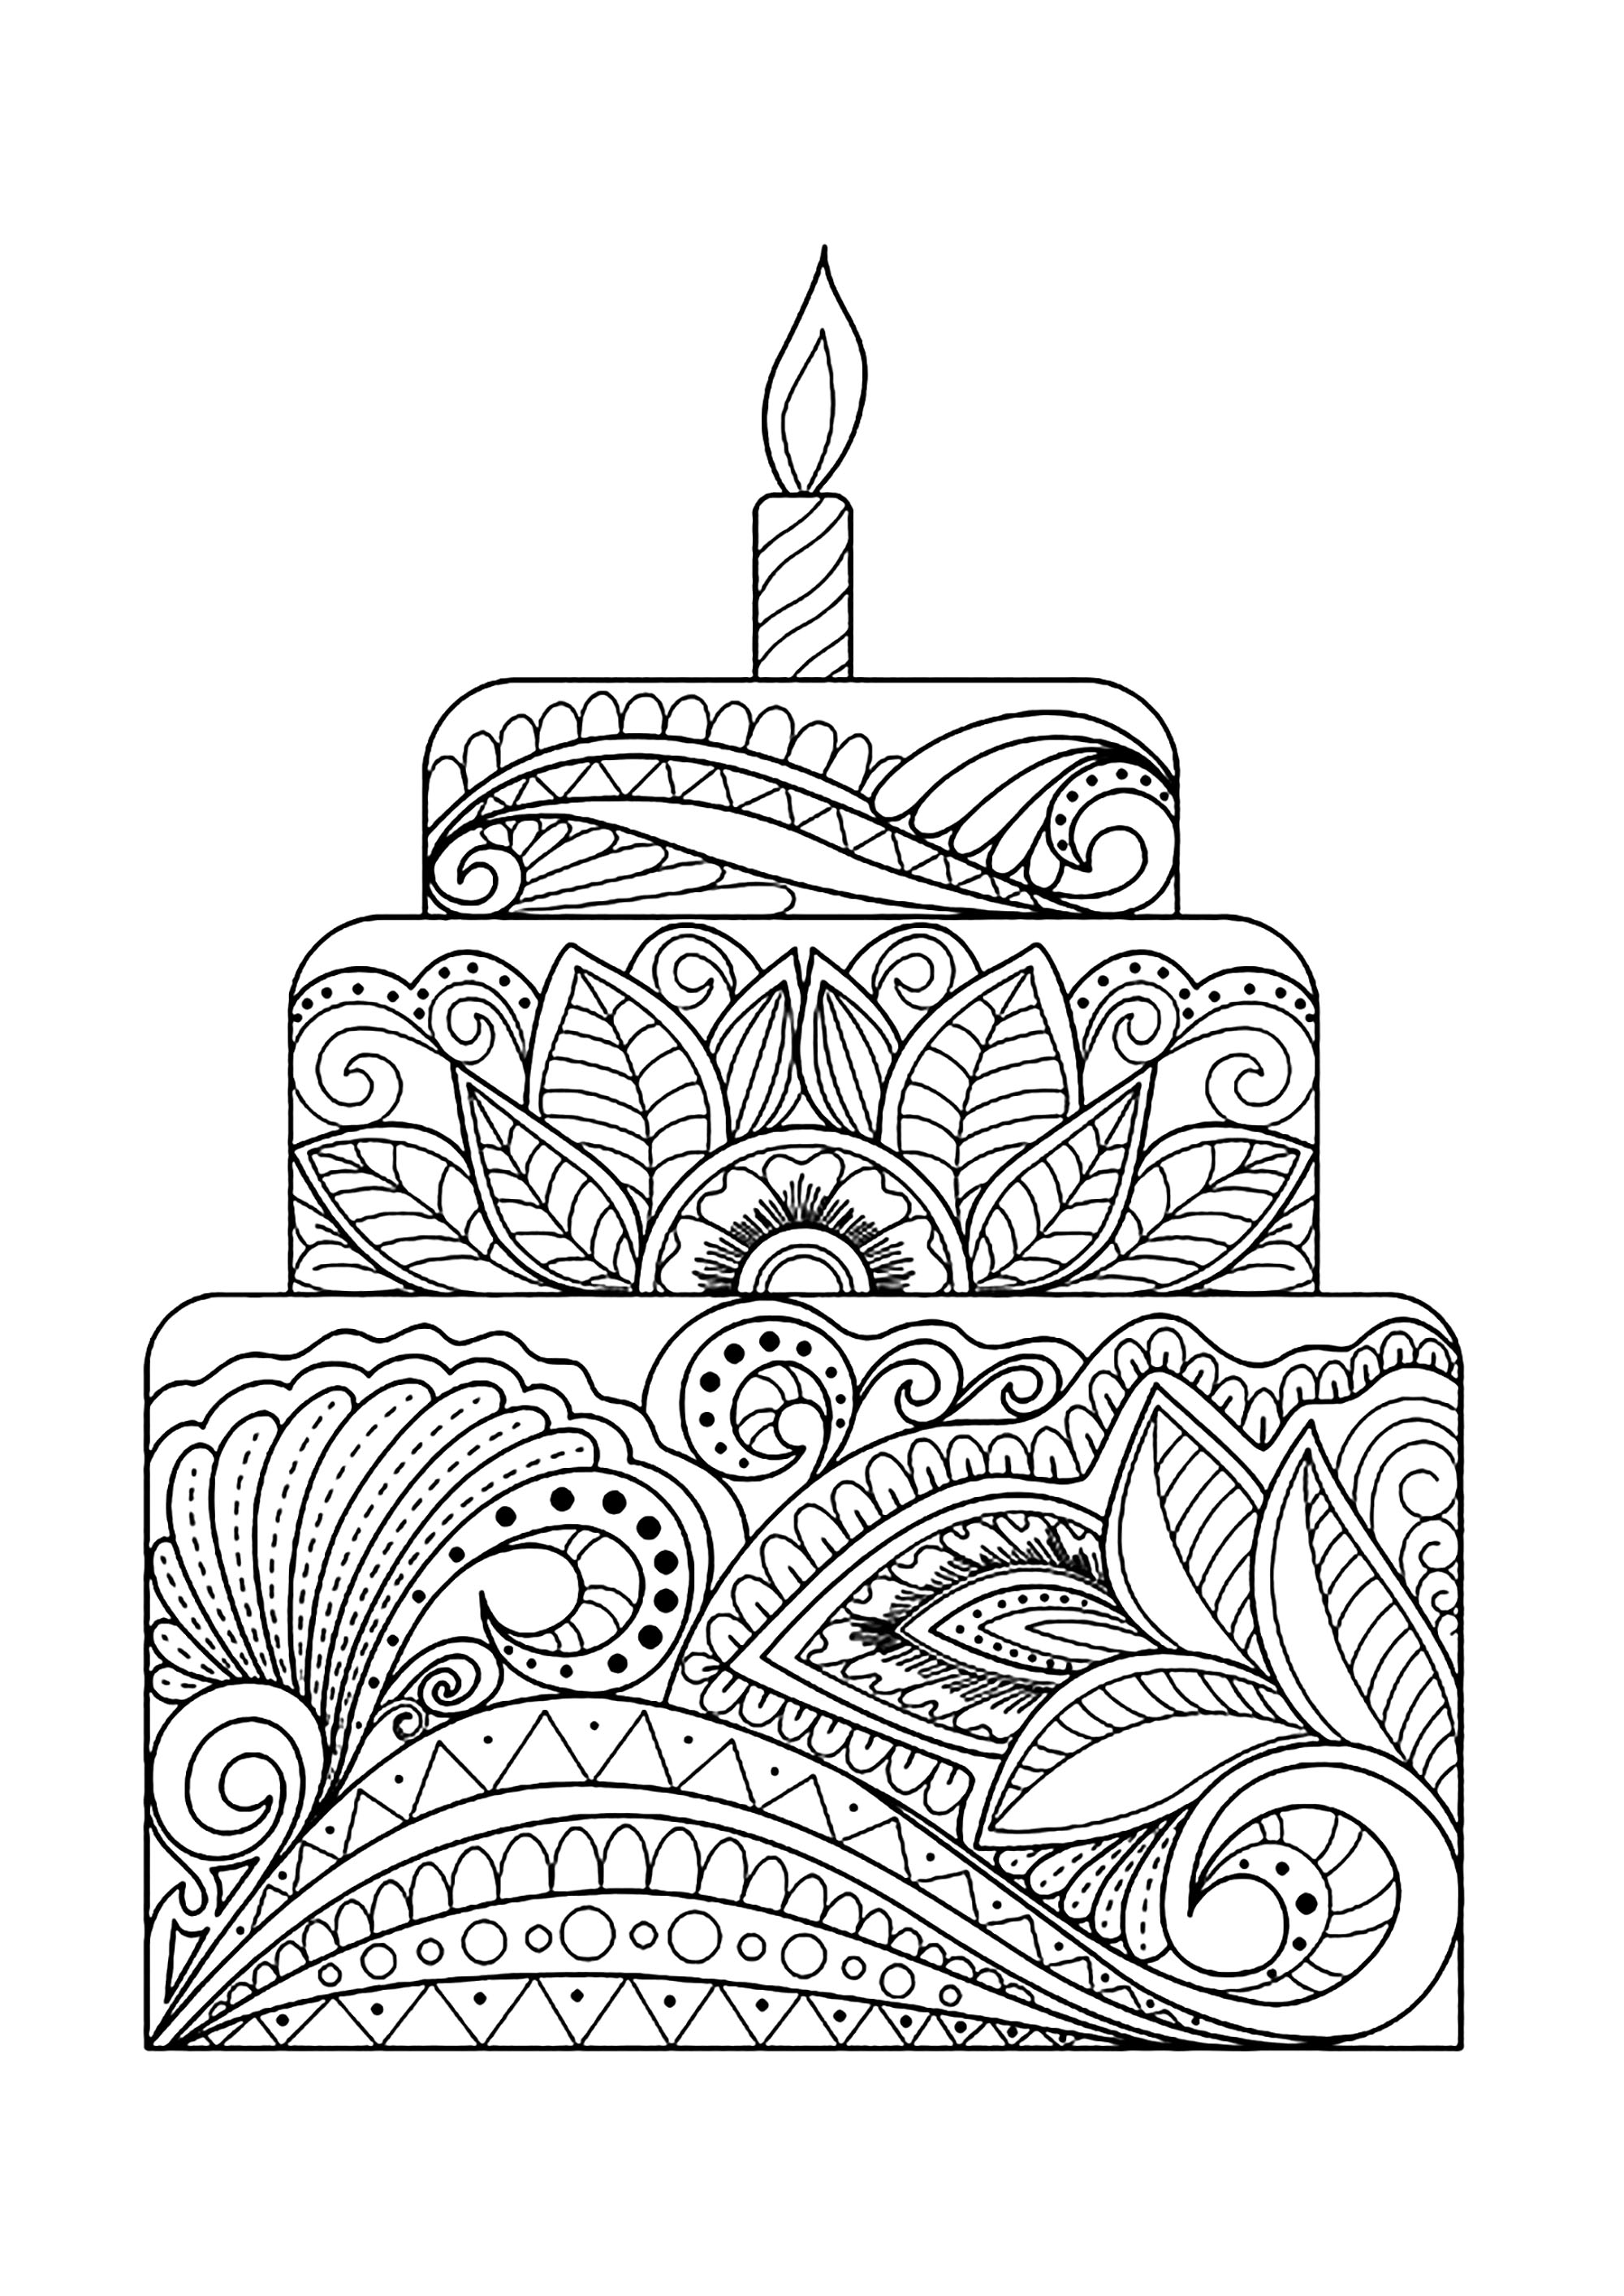 Big flowery cake   Cupcakes Adult Coloring Pages